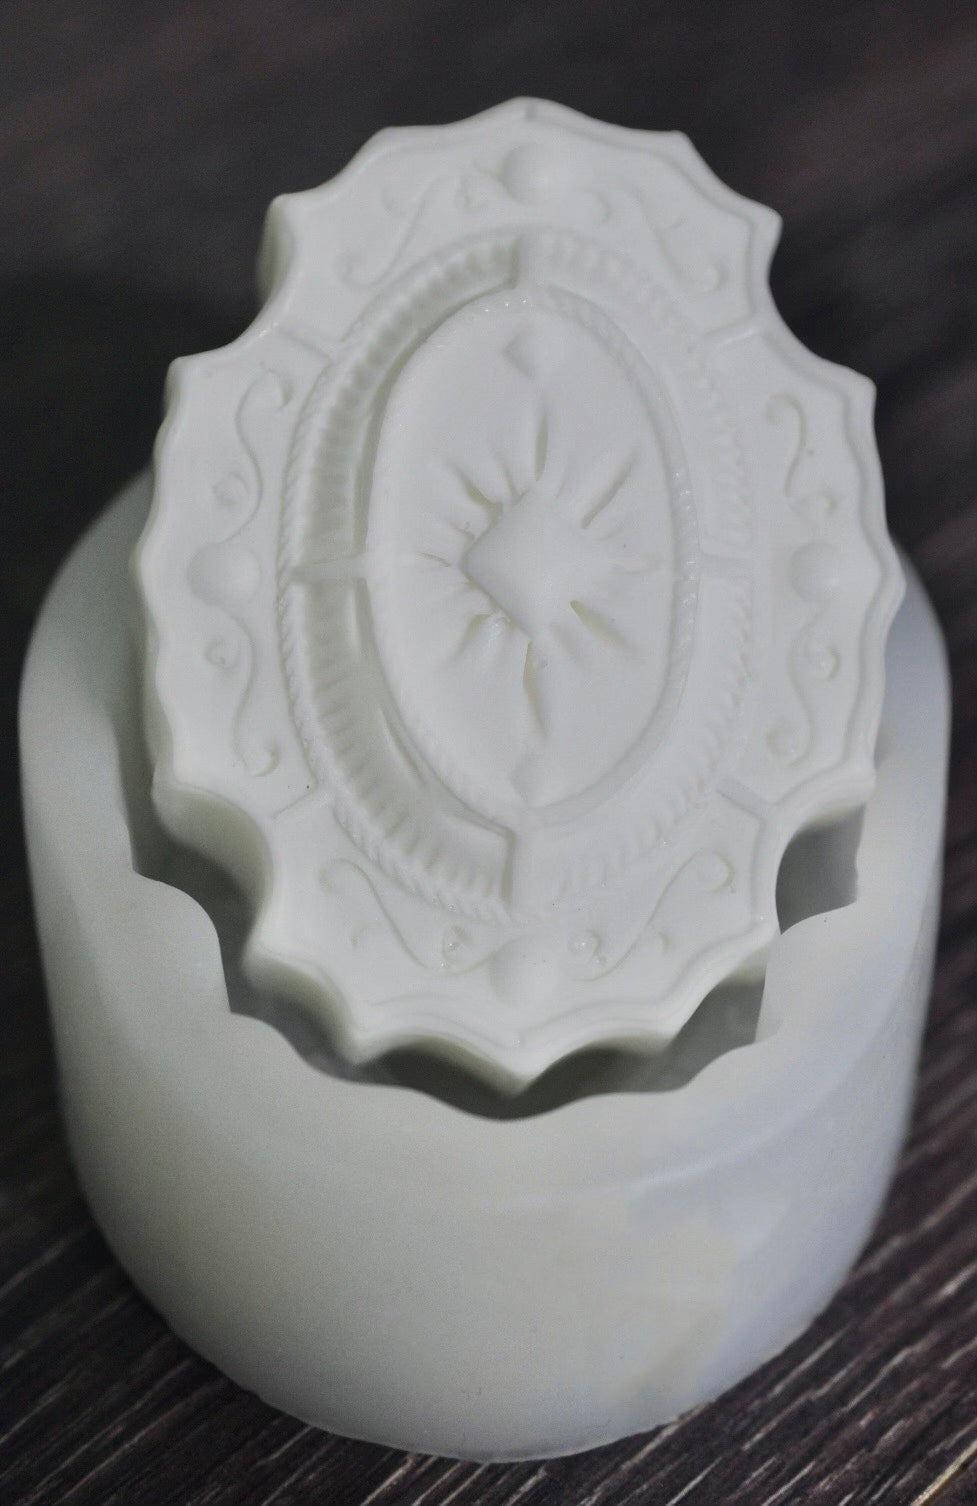 A white, oval soap bar with elegant and filigree design sits on a white mold.